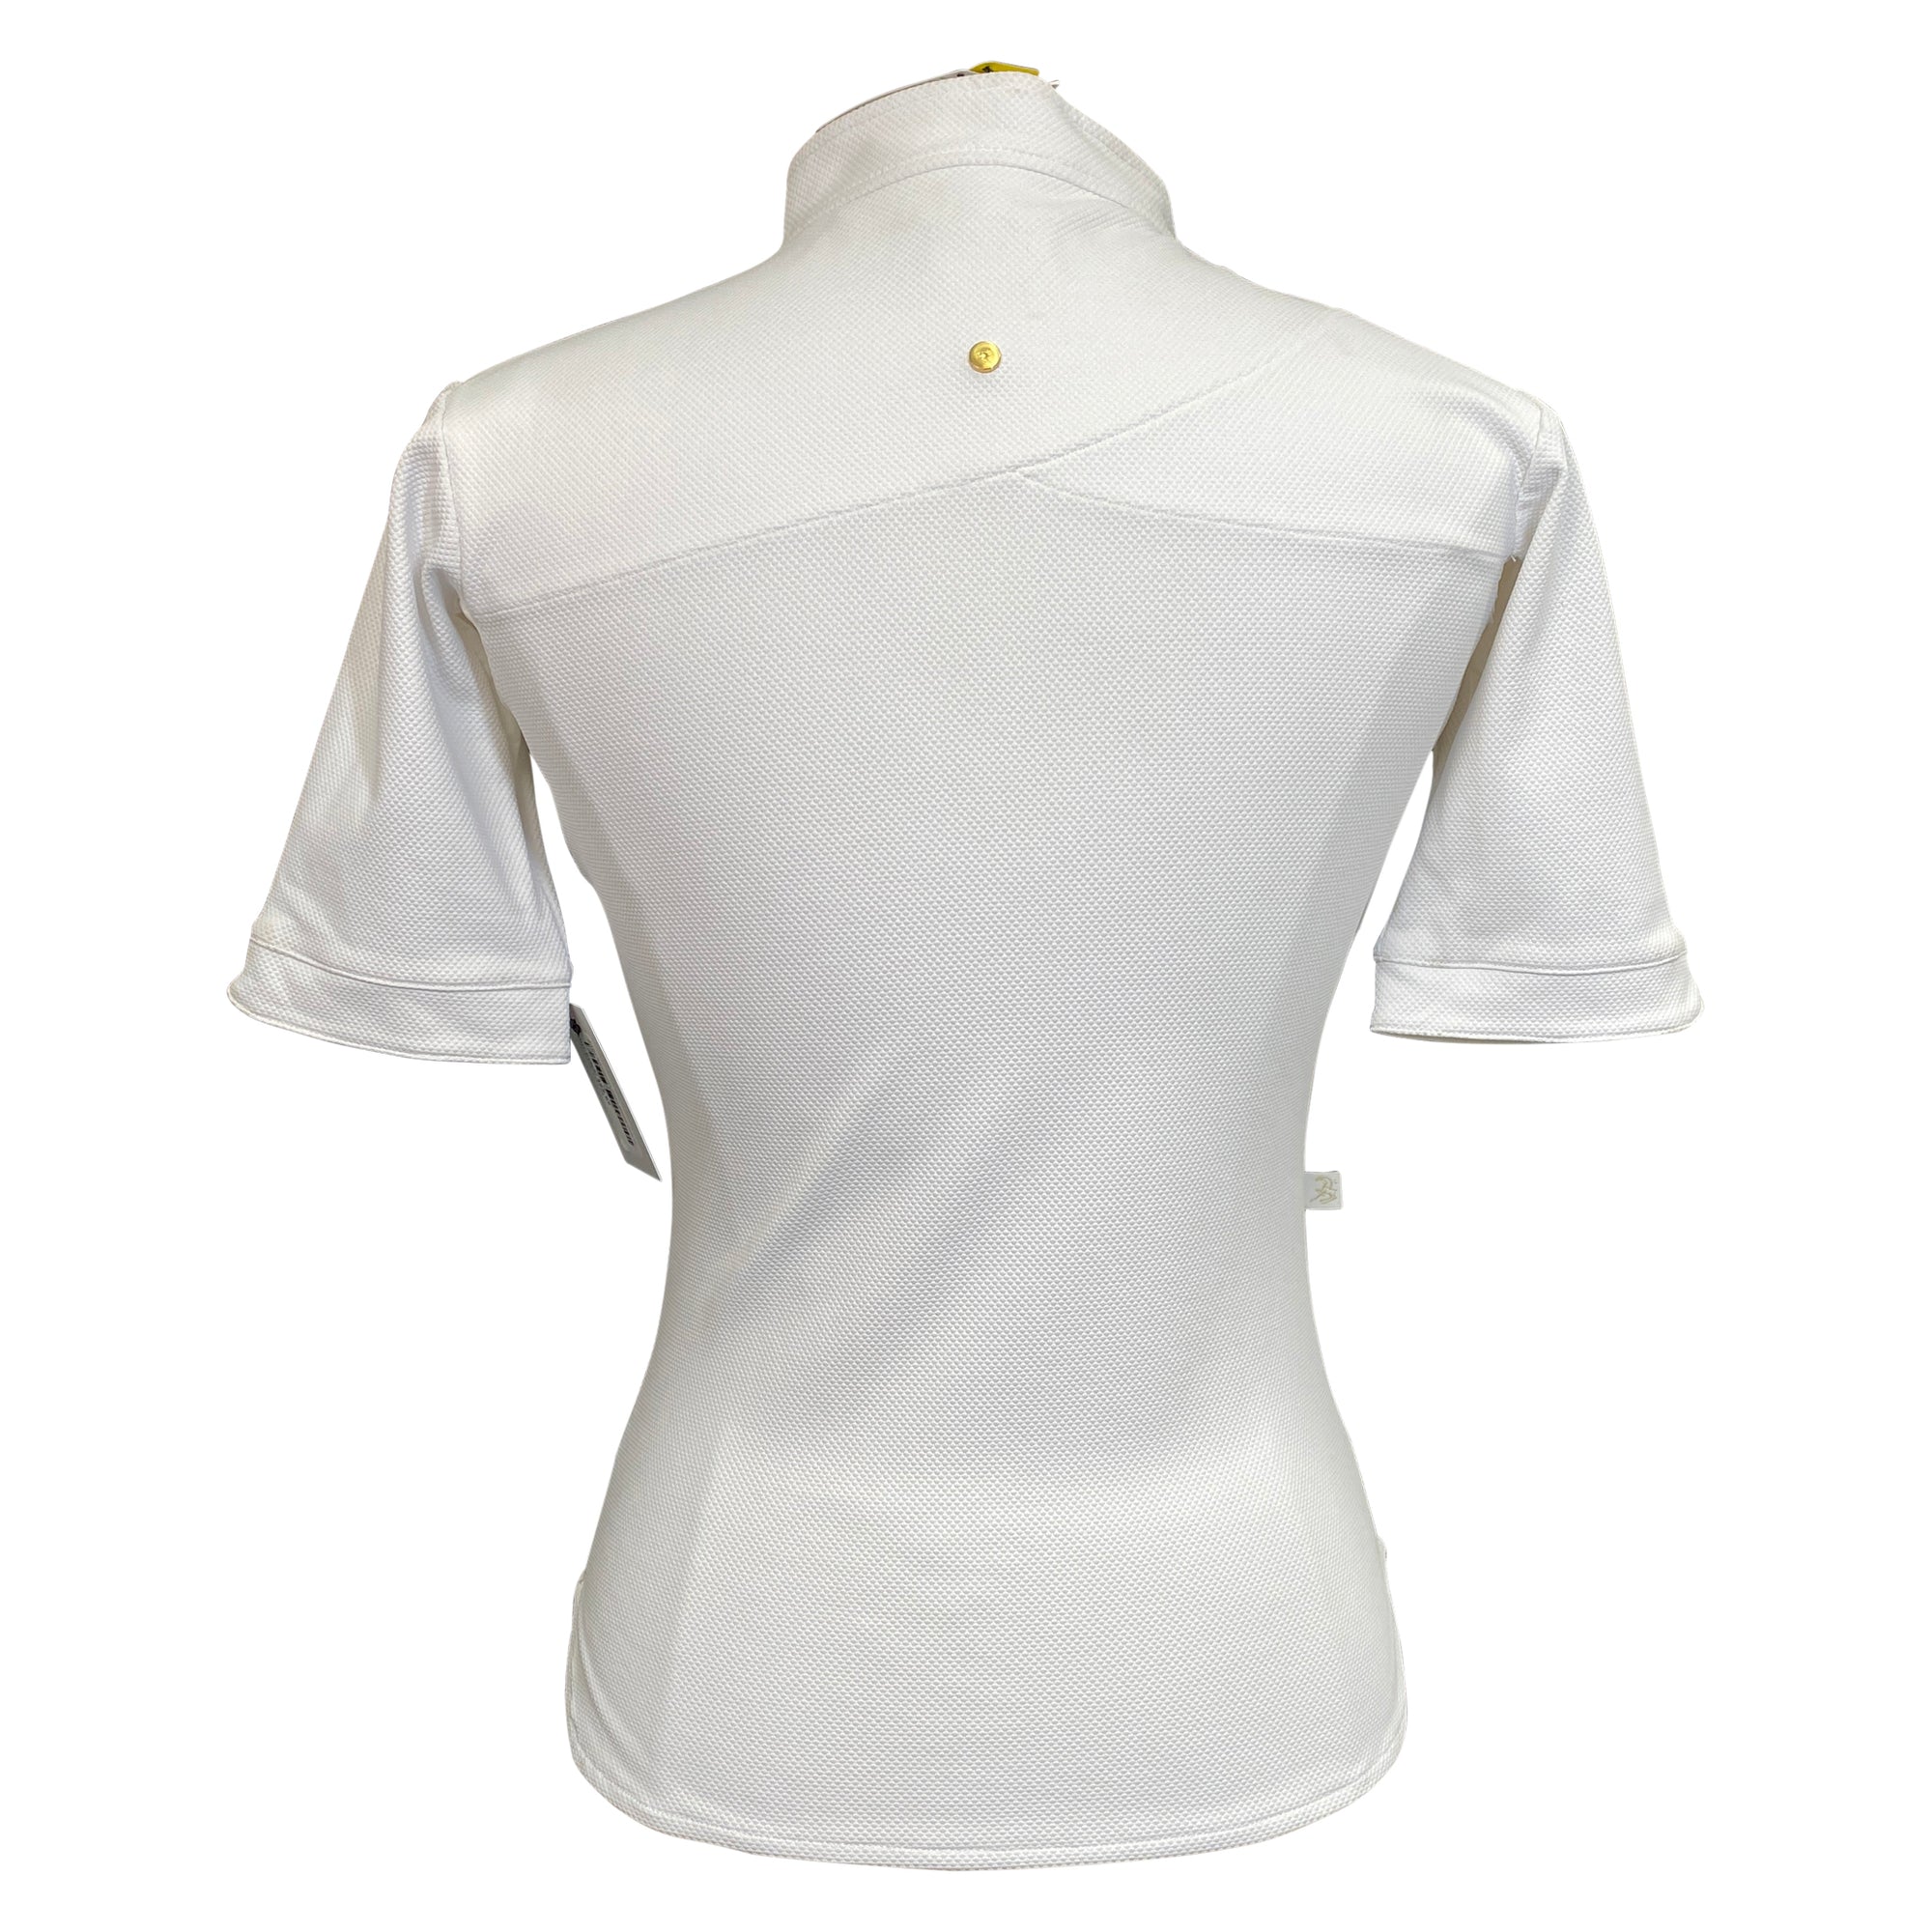 A Tiss B Amazone Short Sleeve Polo in White